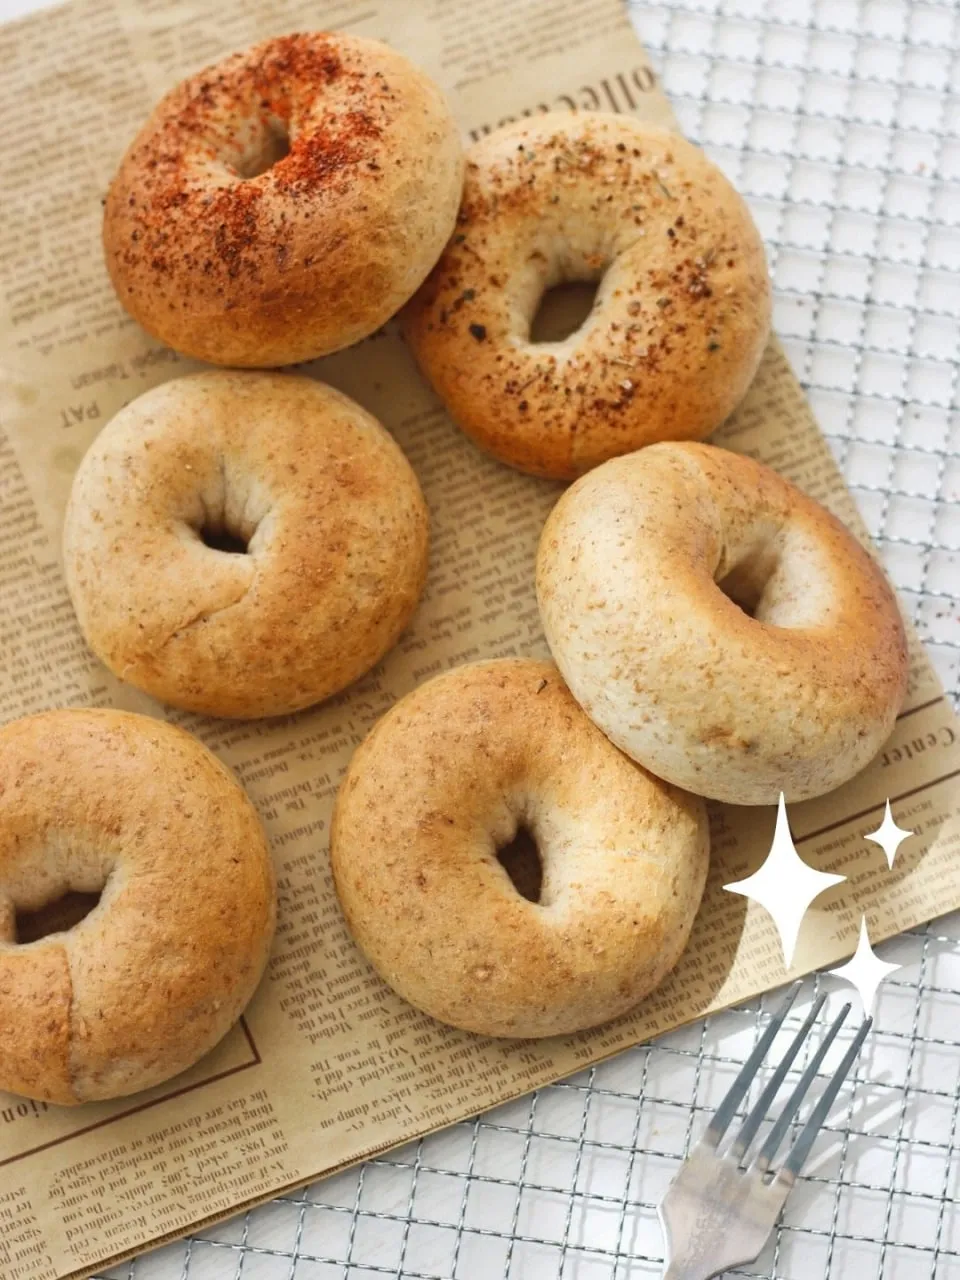 Homemade Whole Wheat Bagel Recipe! - The Conscientious Eater